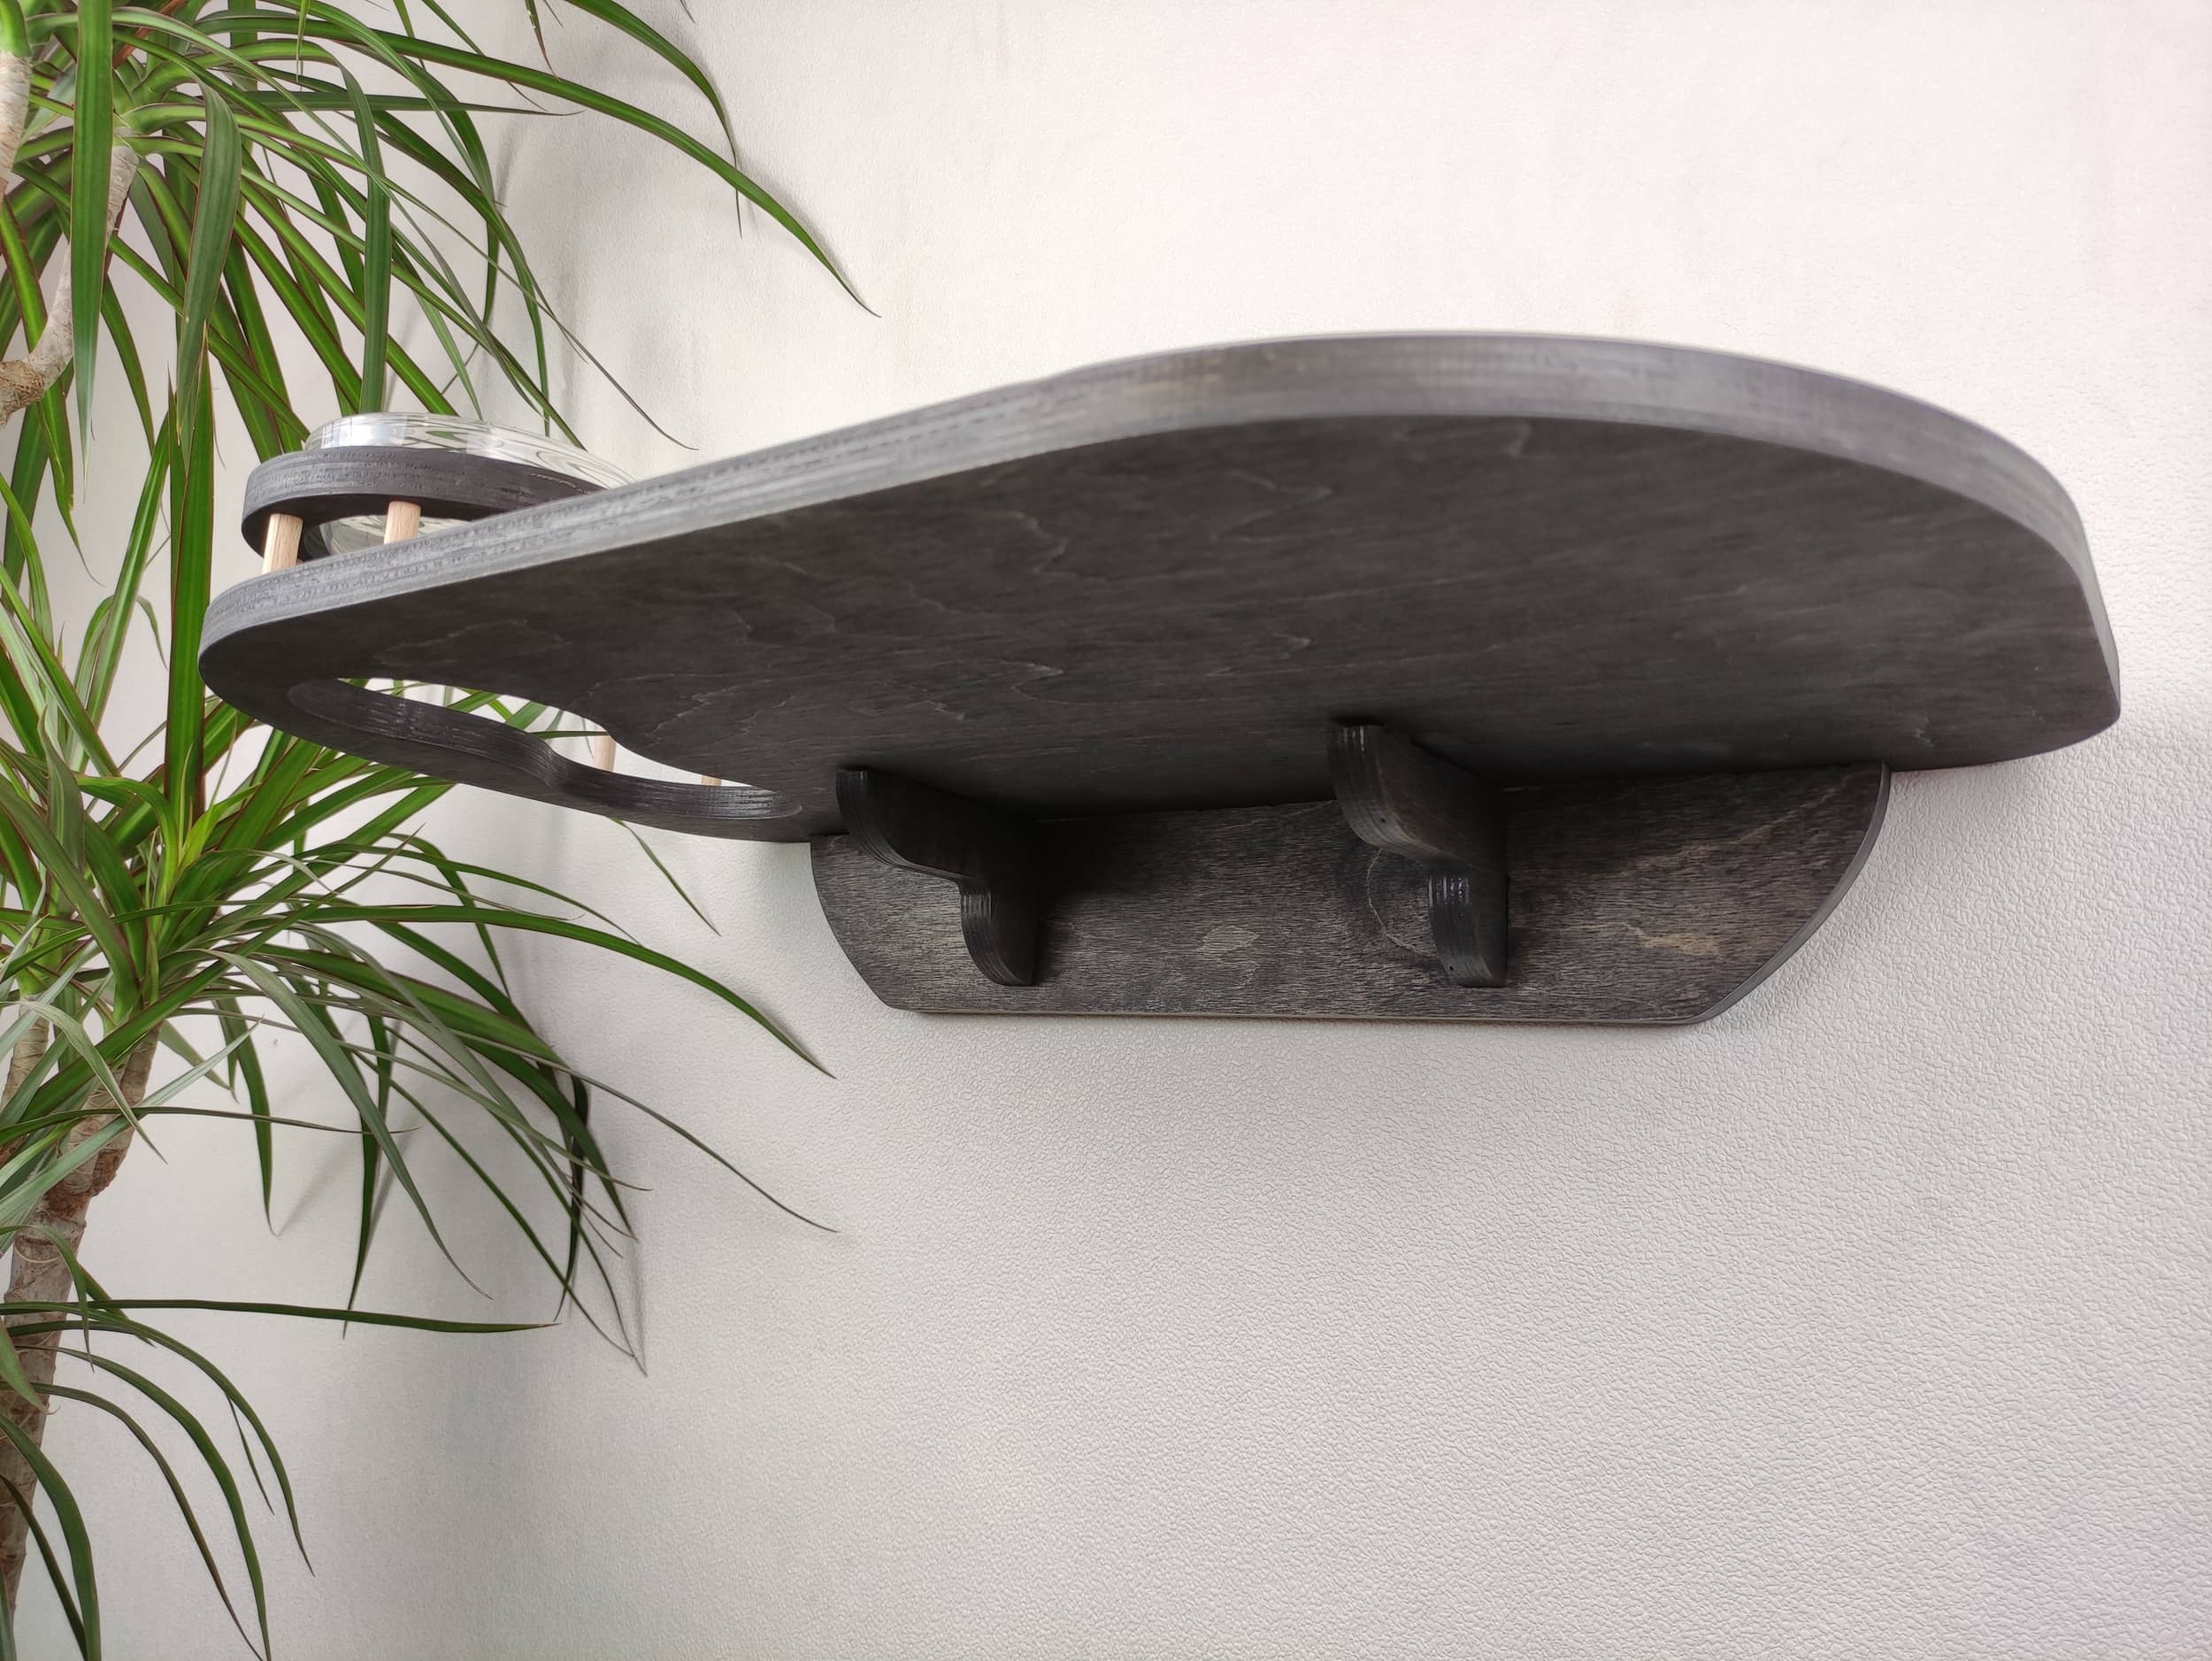 Wall mounted cat feeder with 2 raised bowls